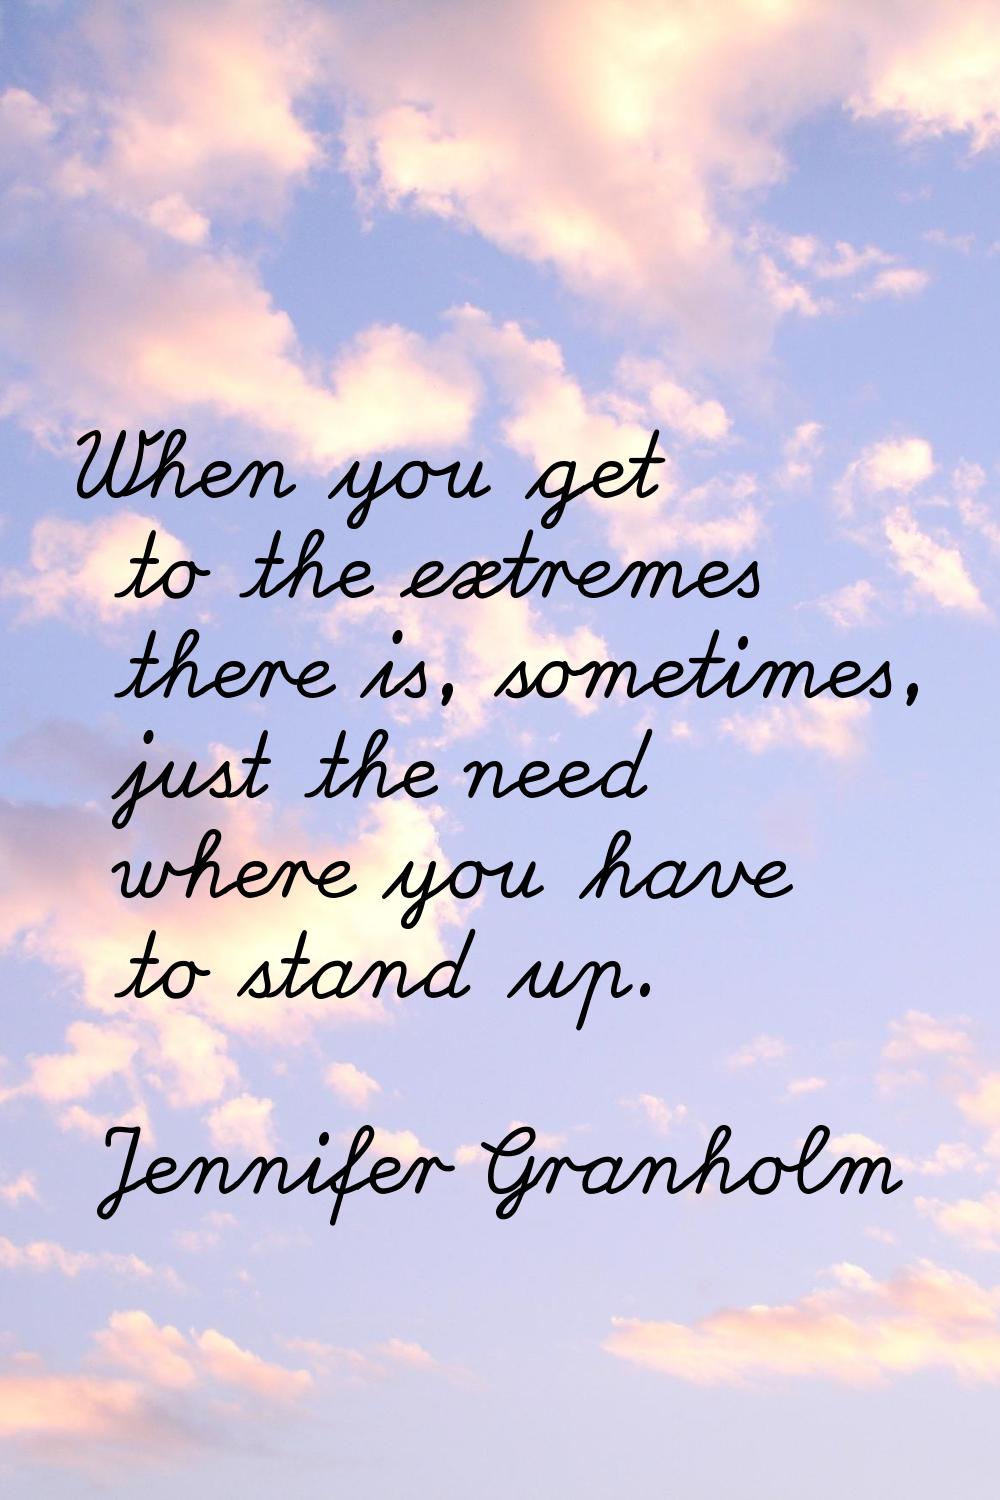 When you get to the extremes there is, sometimes, just the need where you have to stand up.